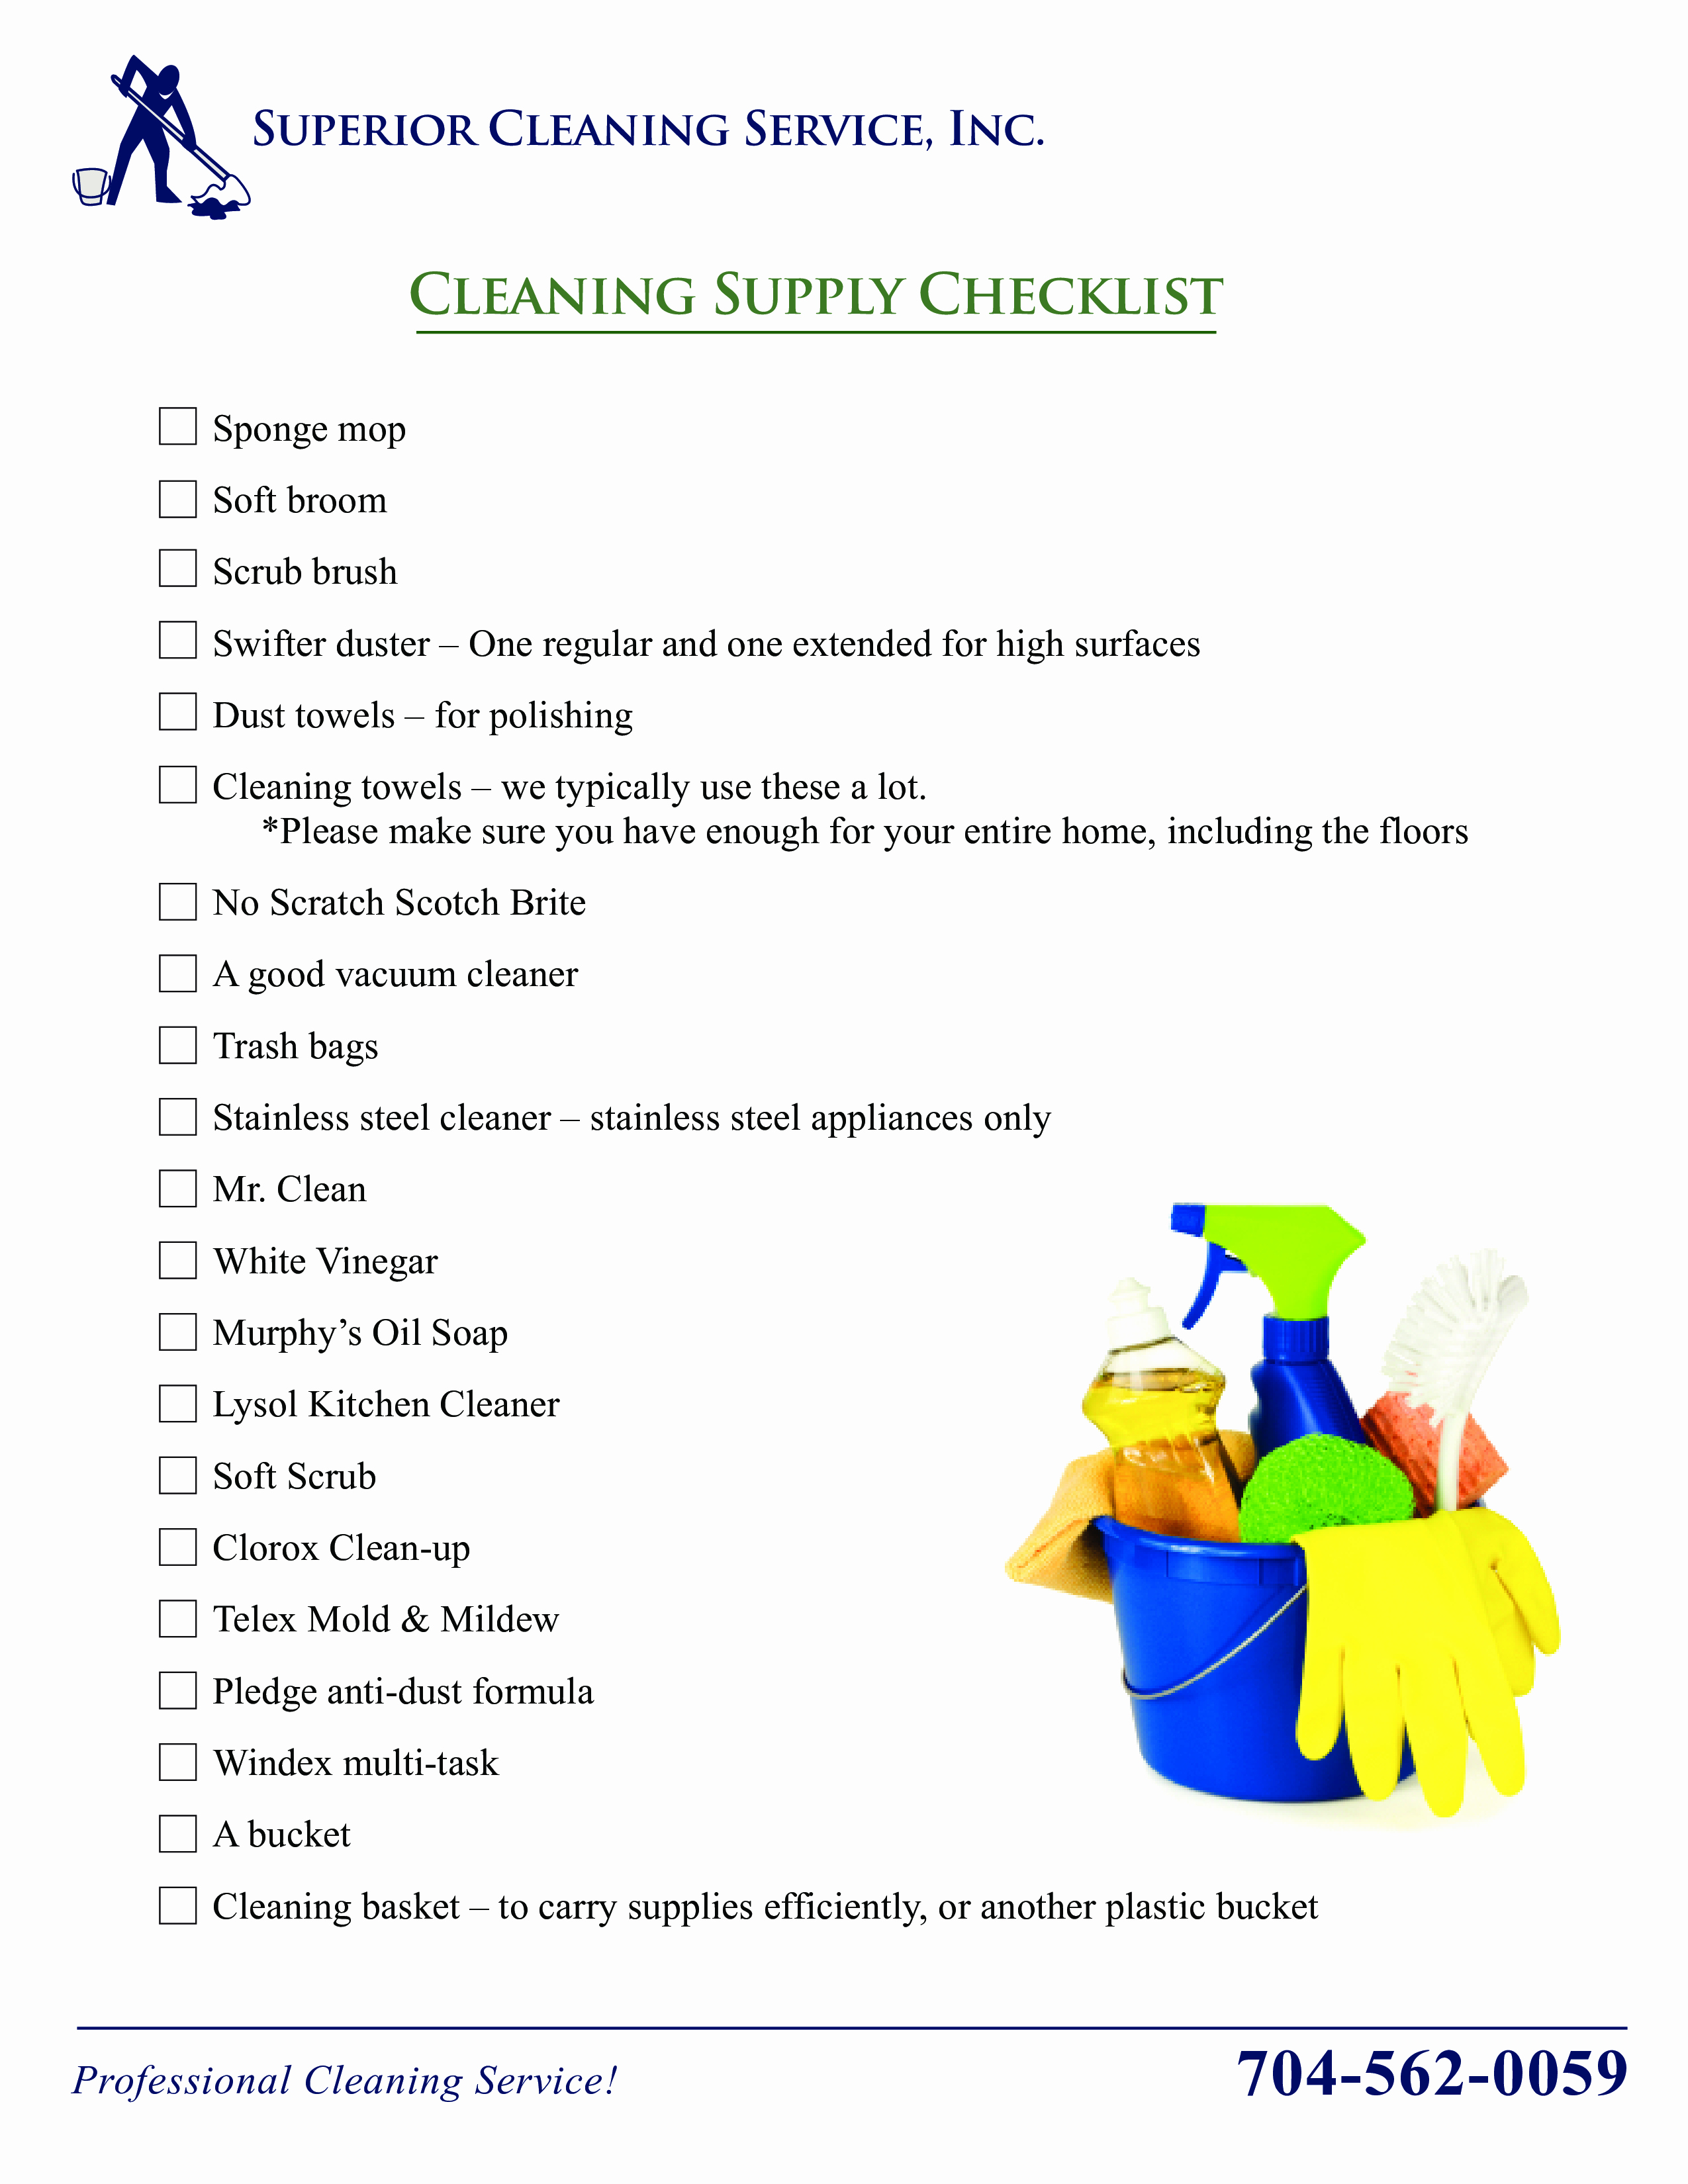 Janitorial Supply List Template New Free Cleaning Supply Checklist